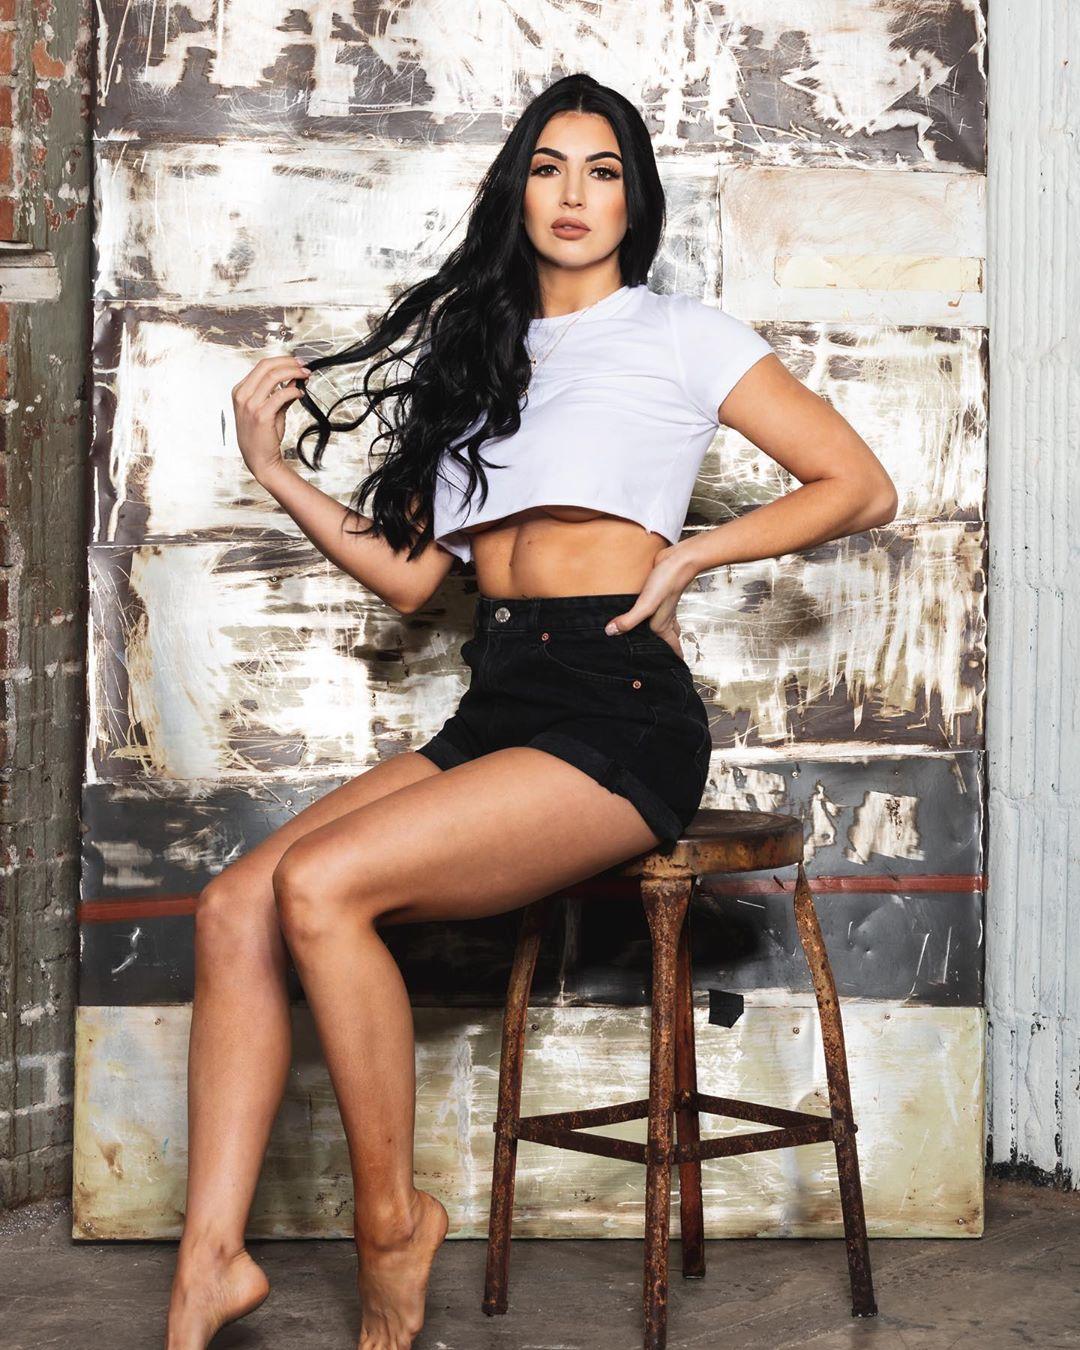 60+ Hot Pictures Of Billie Kay Will Rock The WWE Fan Inside You 9